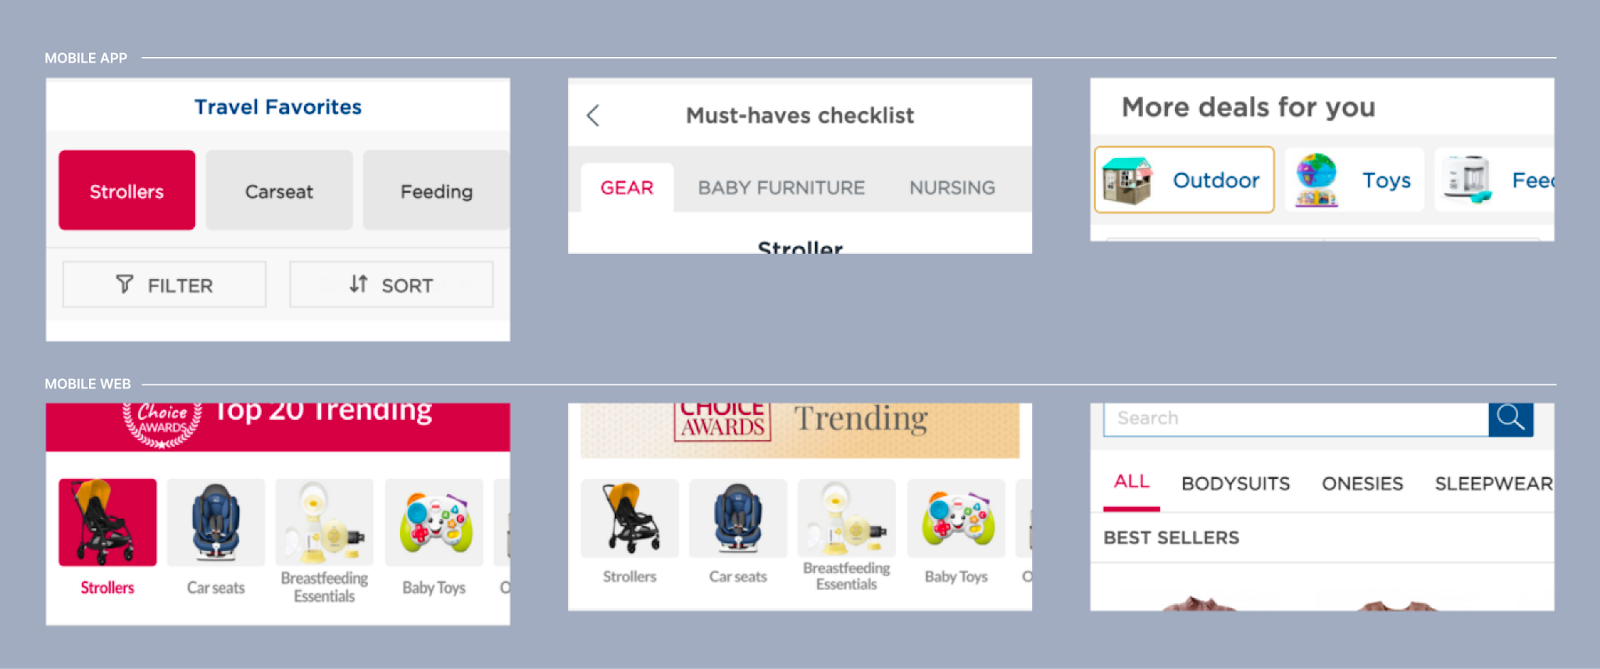 Six screenshots of filtering options for different baby product categories on the app and mobile website. The terms, colors, and functions vary, creating a disjointed feel.